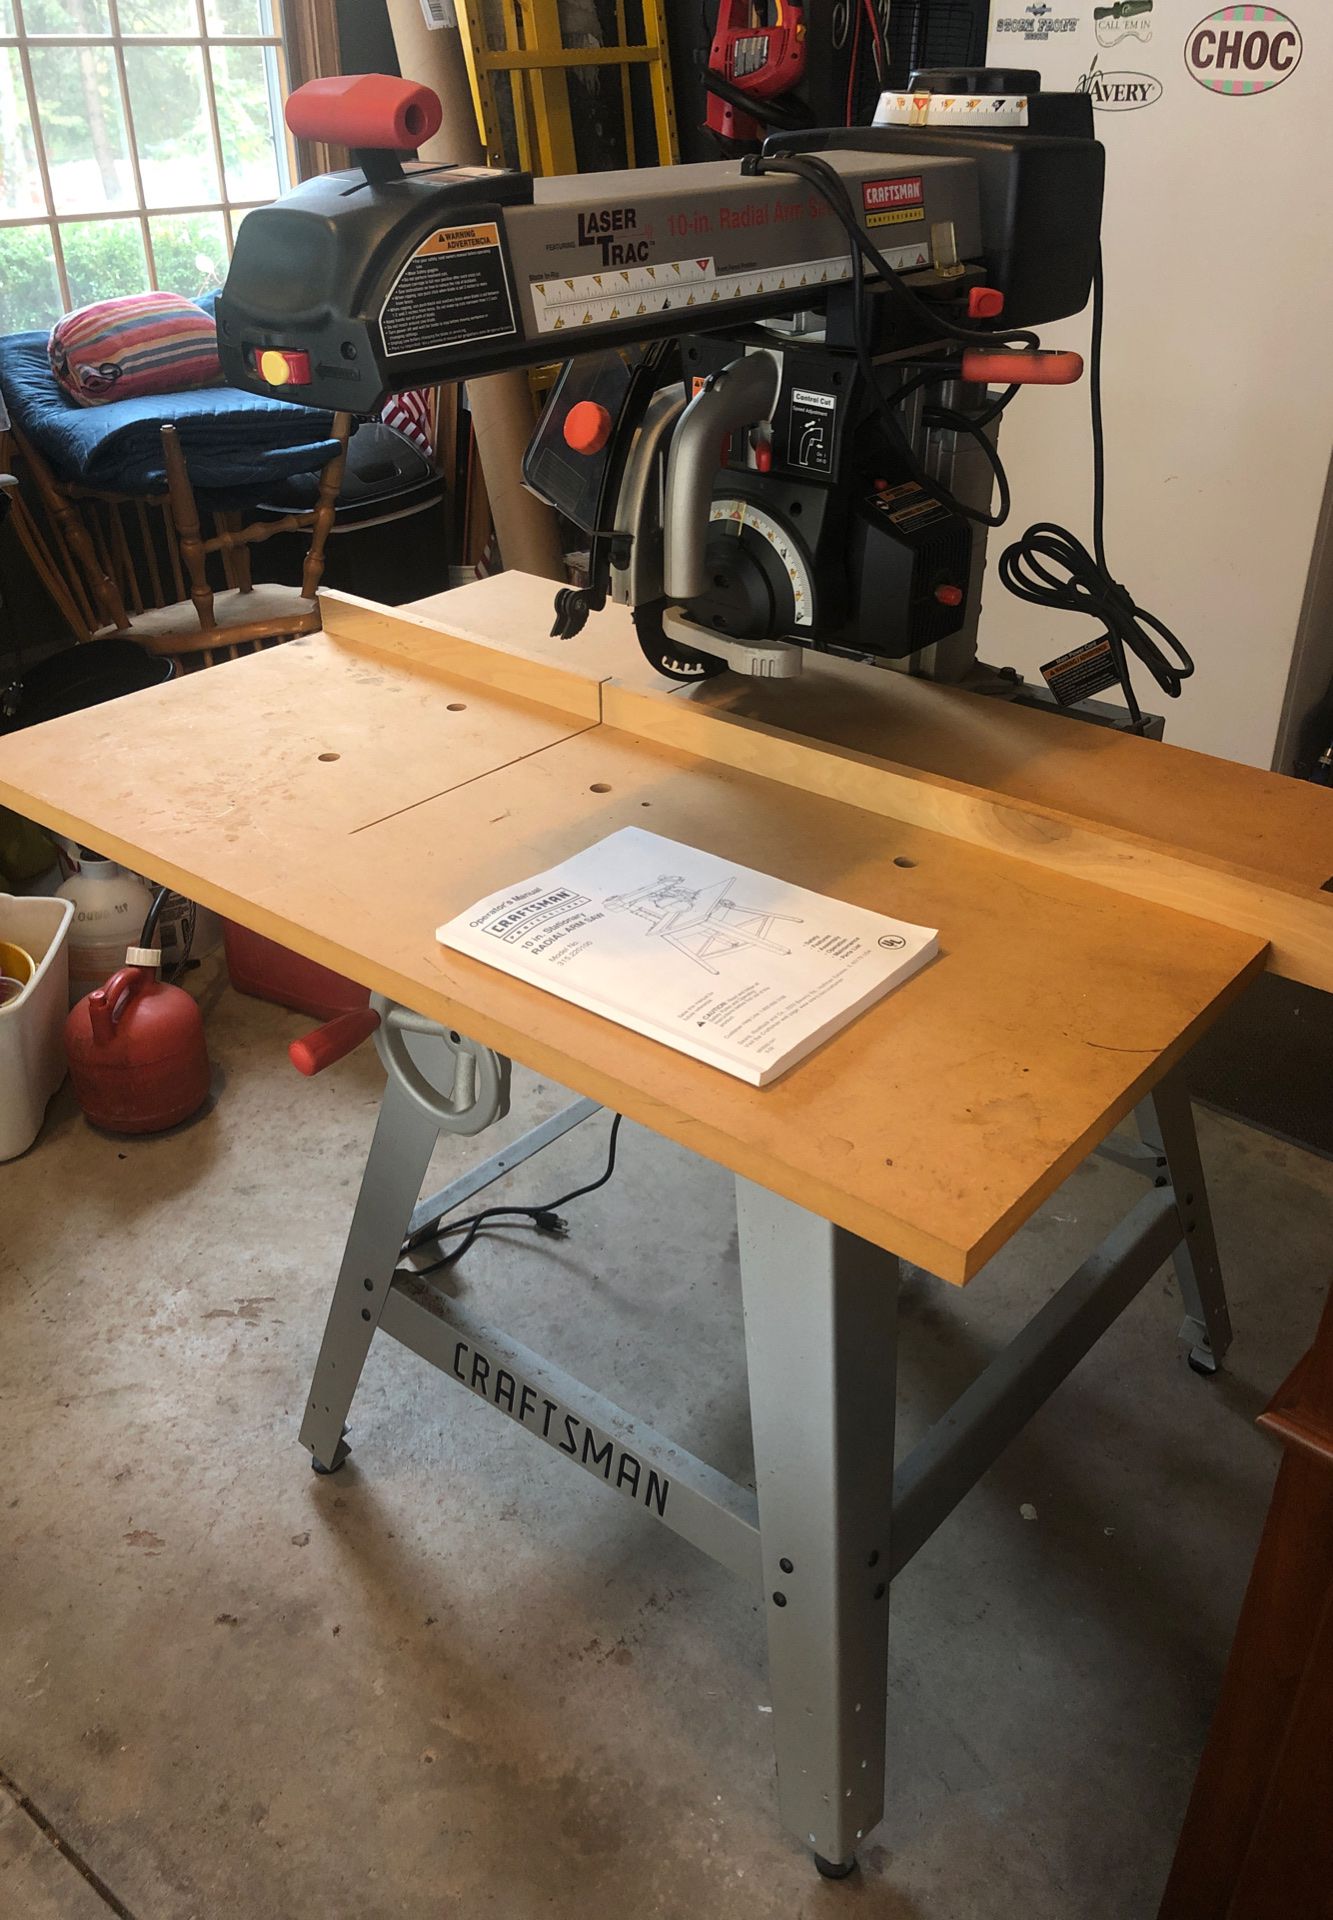 Craftsman 10in Radial Arm Saw - Table Saw